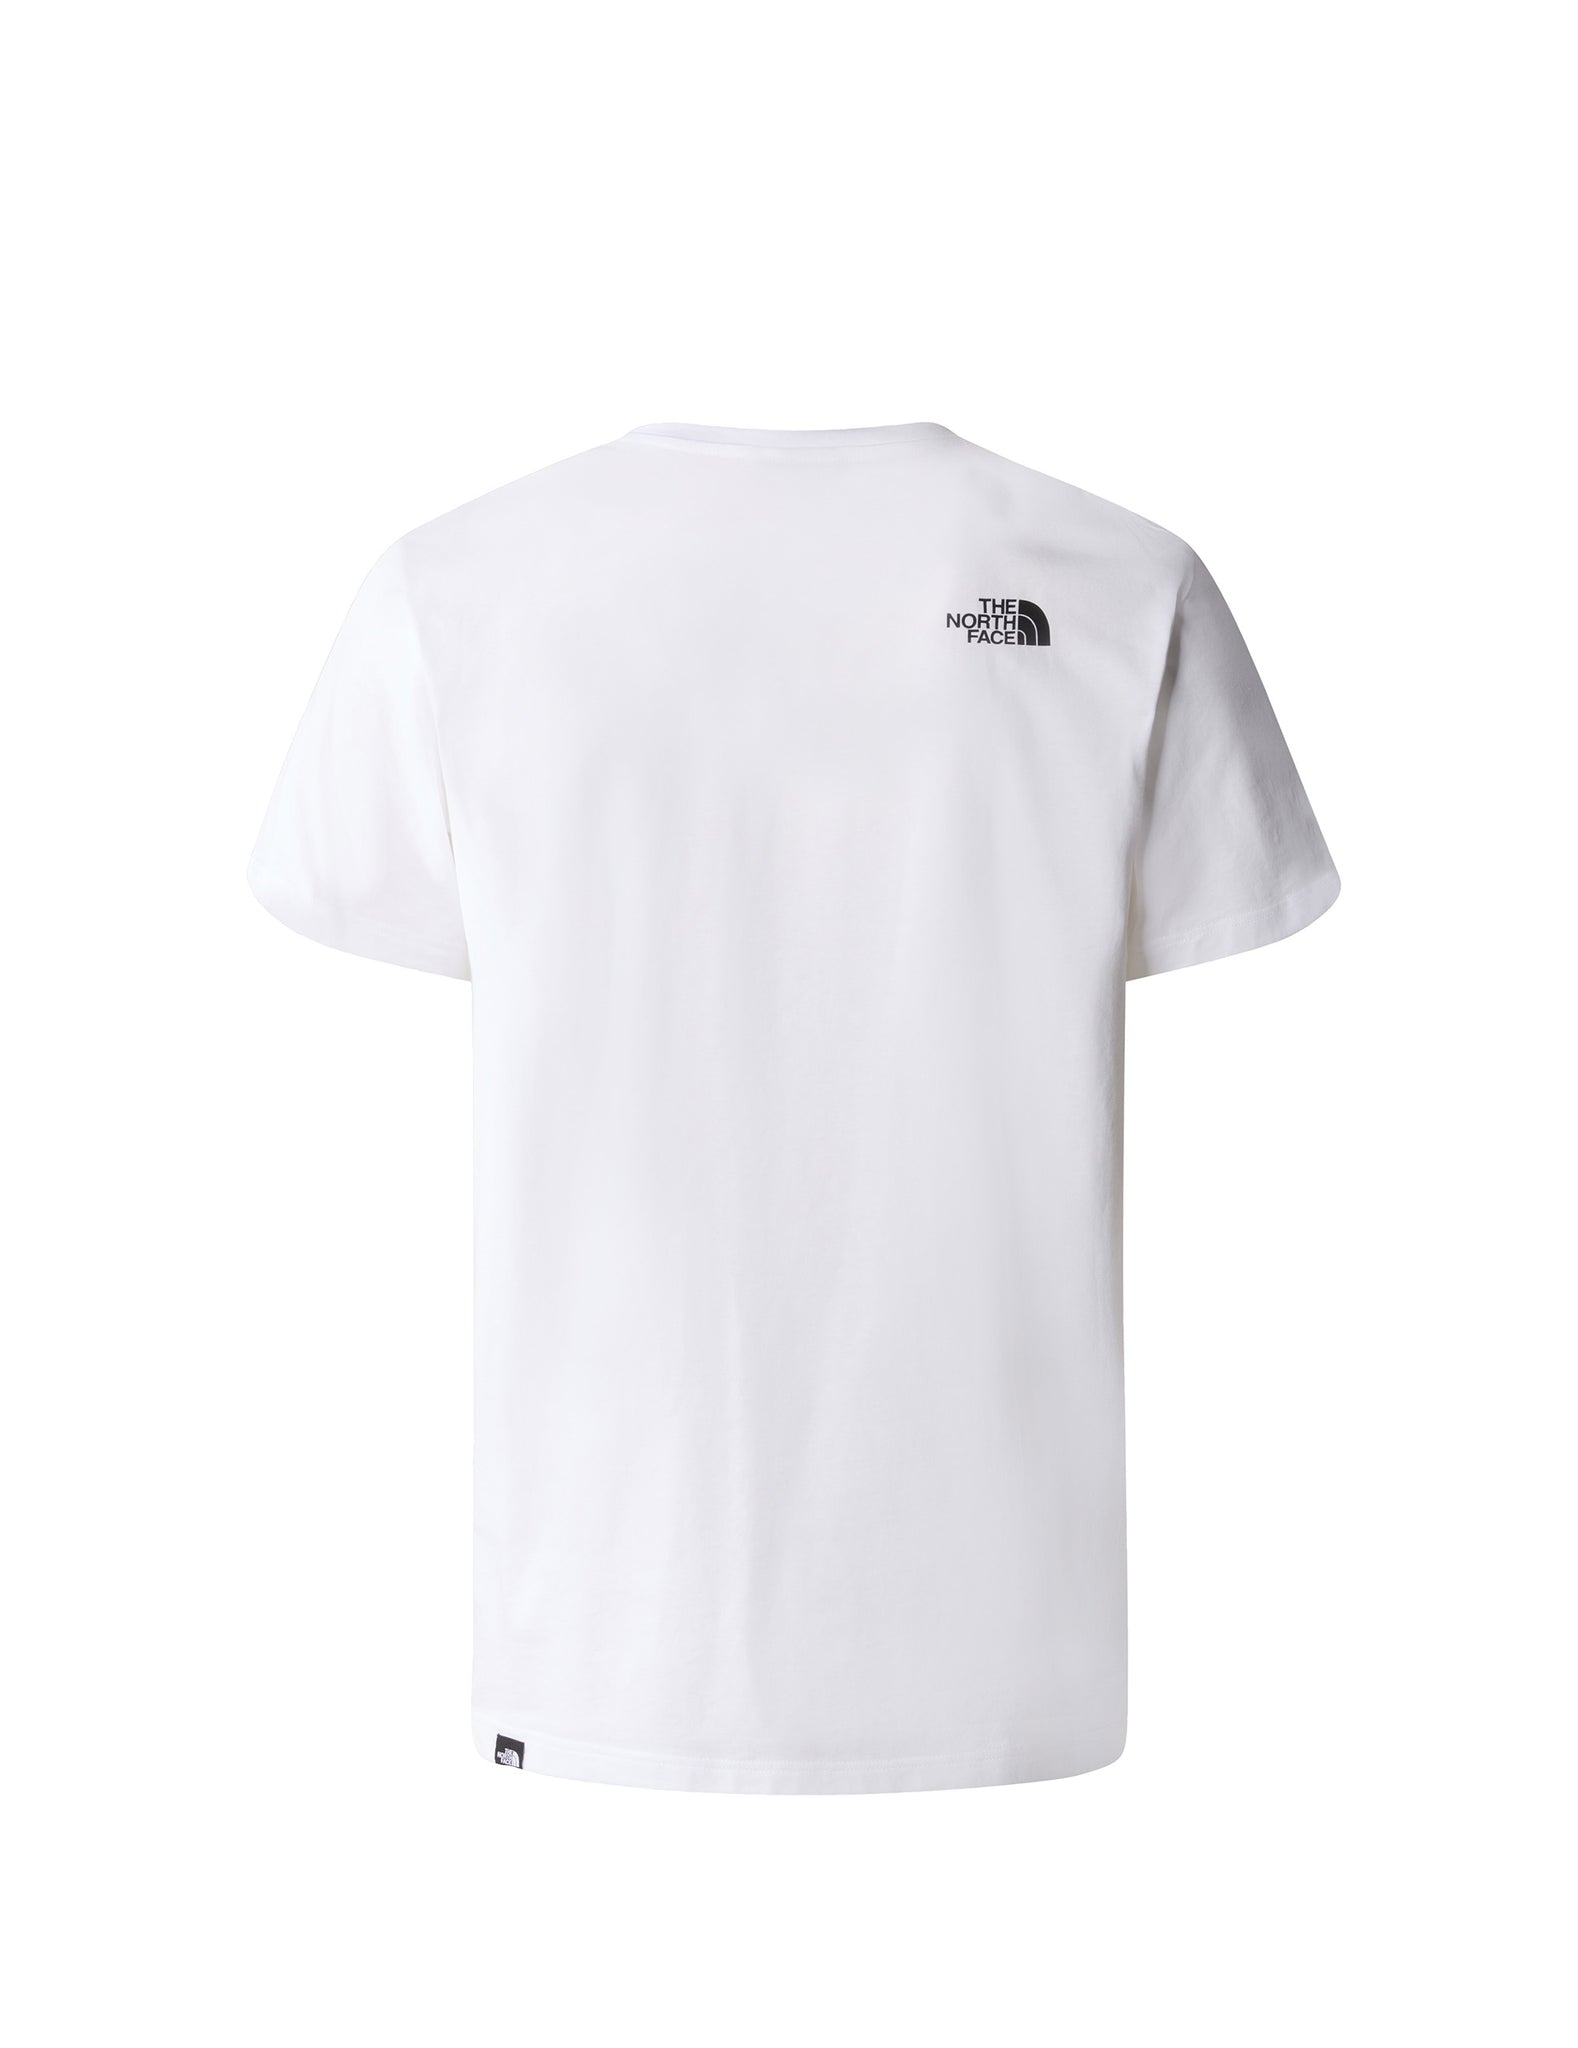 The North Face Men'S /S Simple Dome Tee White